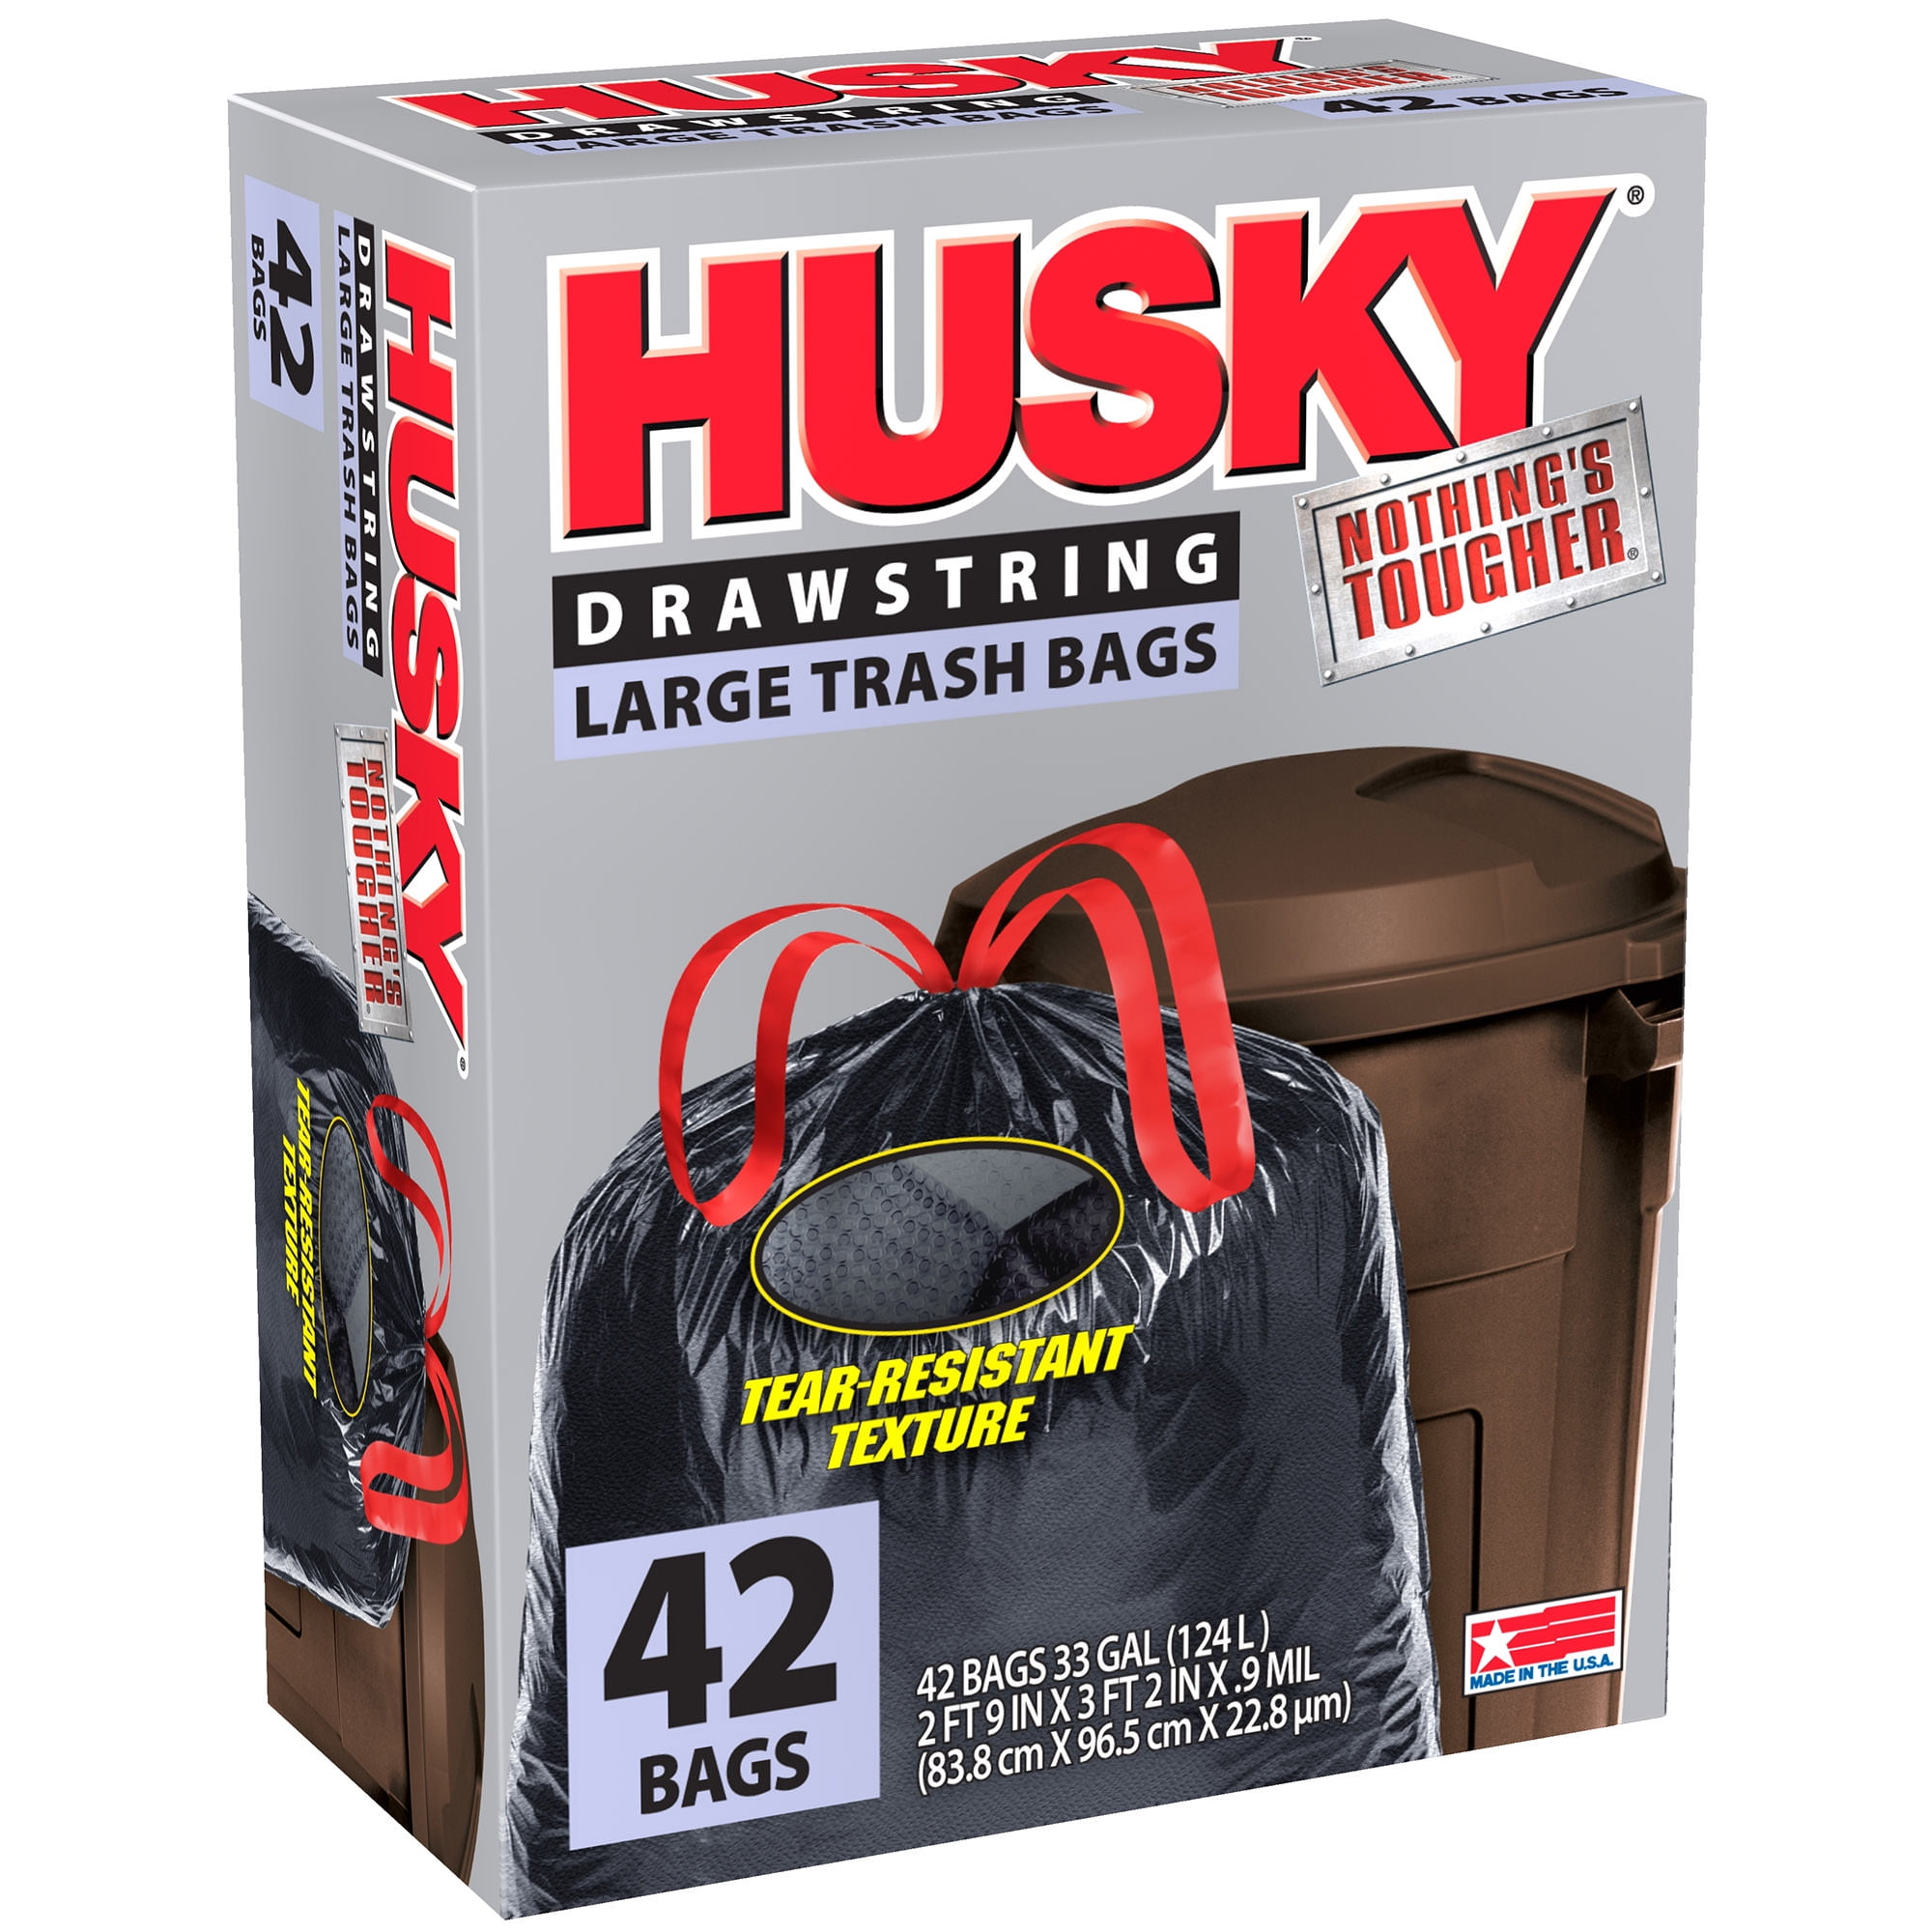  Ultrasac Black Large Heavy Duty Drawstring Trash Bags 33 Gallon  1.4 MIL, 33.5 x 38 - Pack of 86 - For Home, Commercial, Construction, &  Outdoor : Health & Household